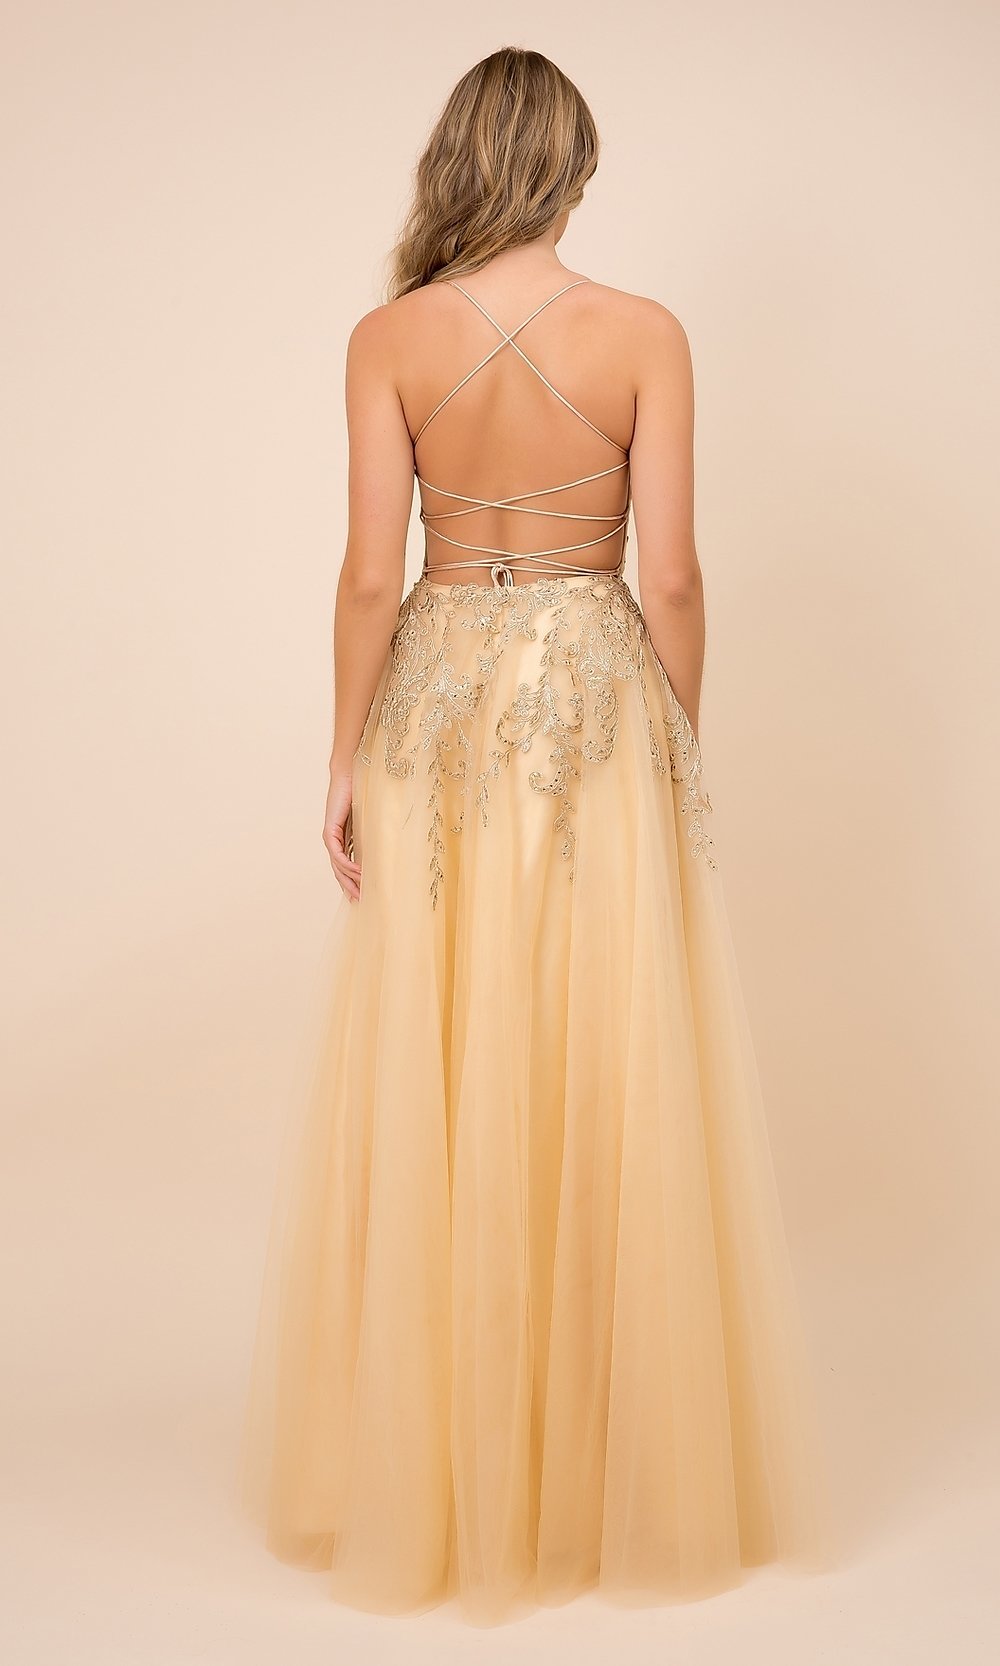 Gold Tulle Long Prom Dress, A line Gold Formal Graduation Party Dress